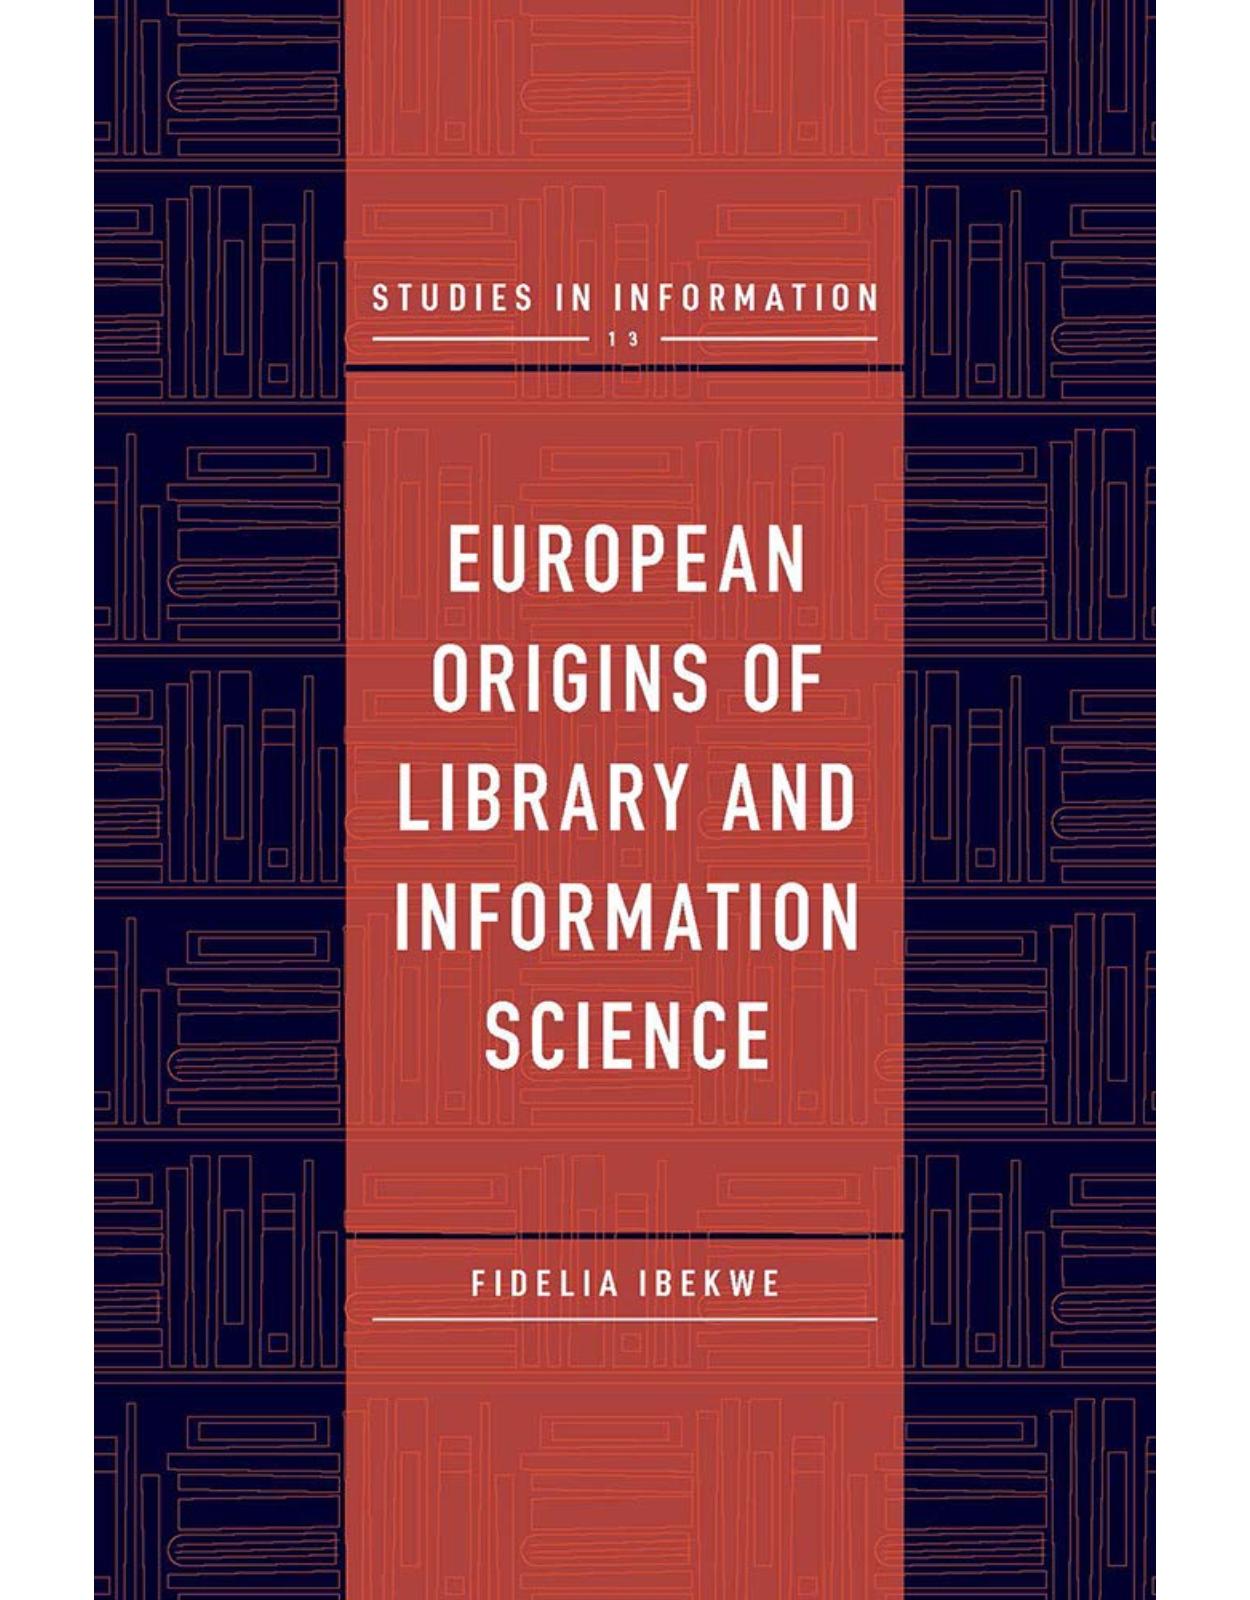 European Origins of Library and Information Science (Studies in Information)